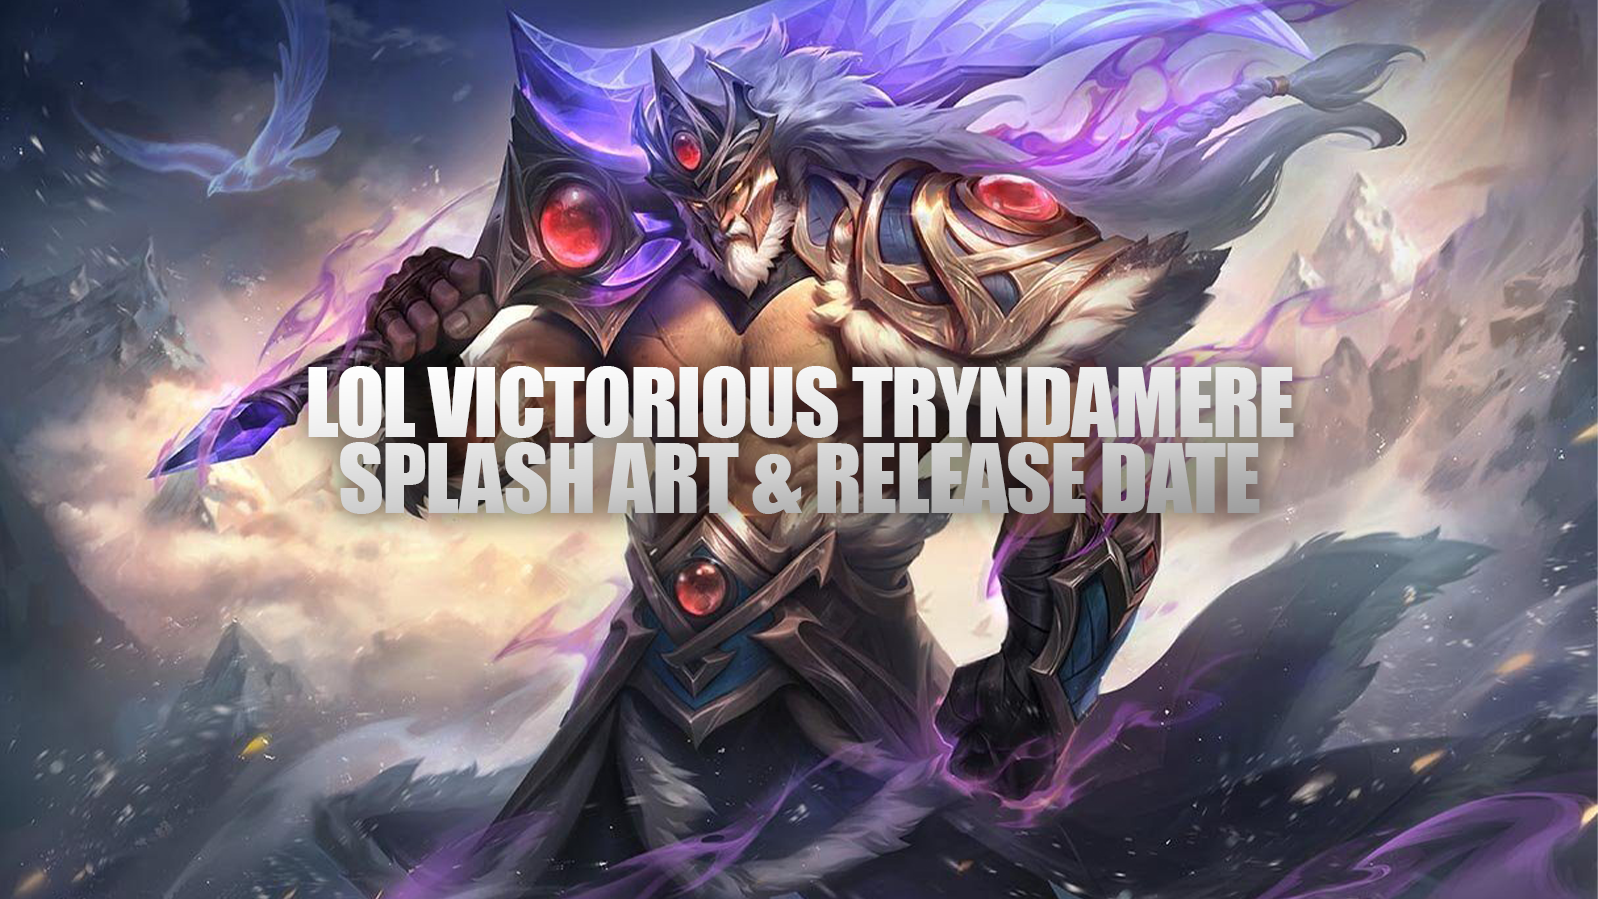 The vibrant splash art for Victorious Tryndamere was recently revealed, showing the champion in stunning new purplish theme giving him a powerful and fantasy-inspired look. The overall theme feels regal yet savage, just like the champion himself. Fans are already raving about how fabulous Victorious Tryndamere looks.